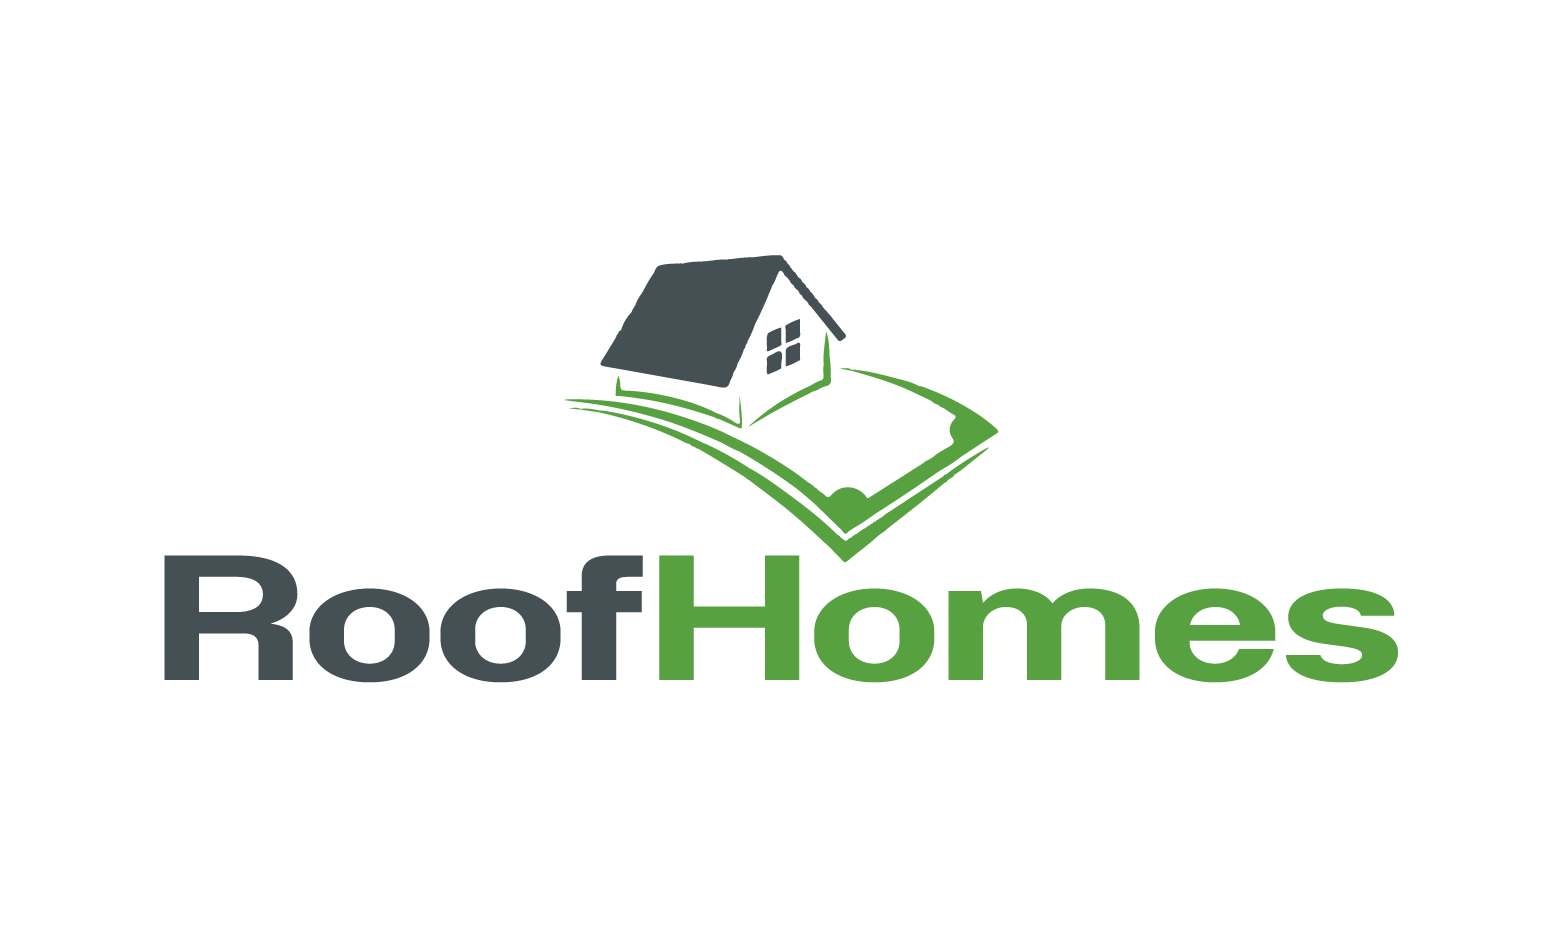 RoofHomes.com - Creative brandable domain for sale